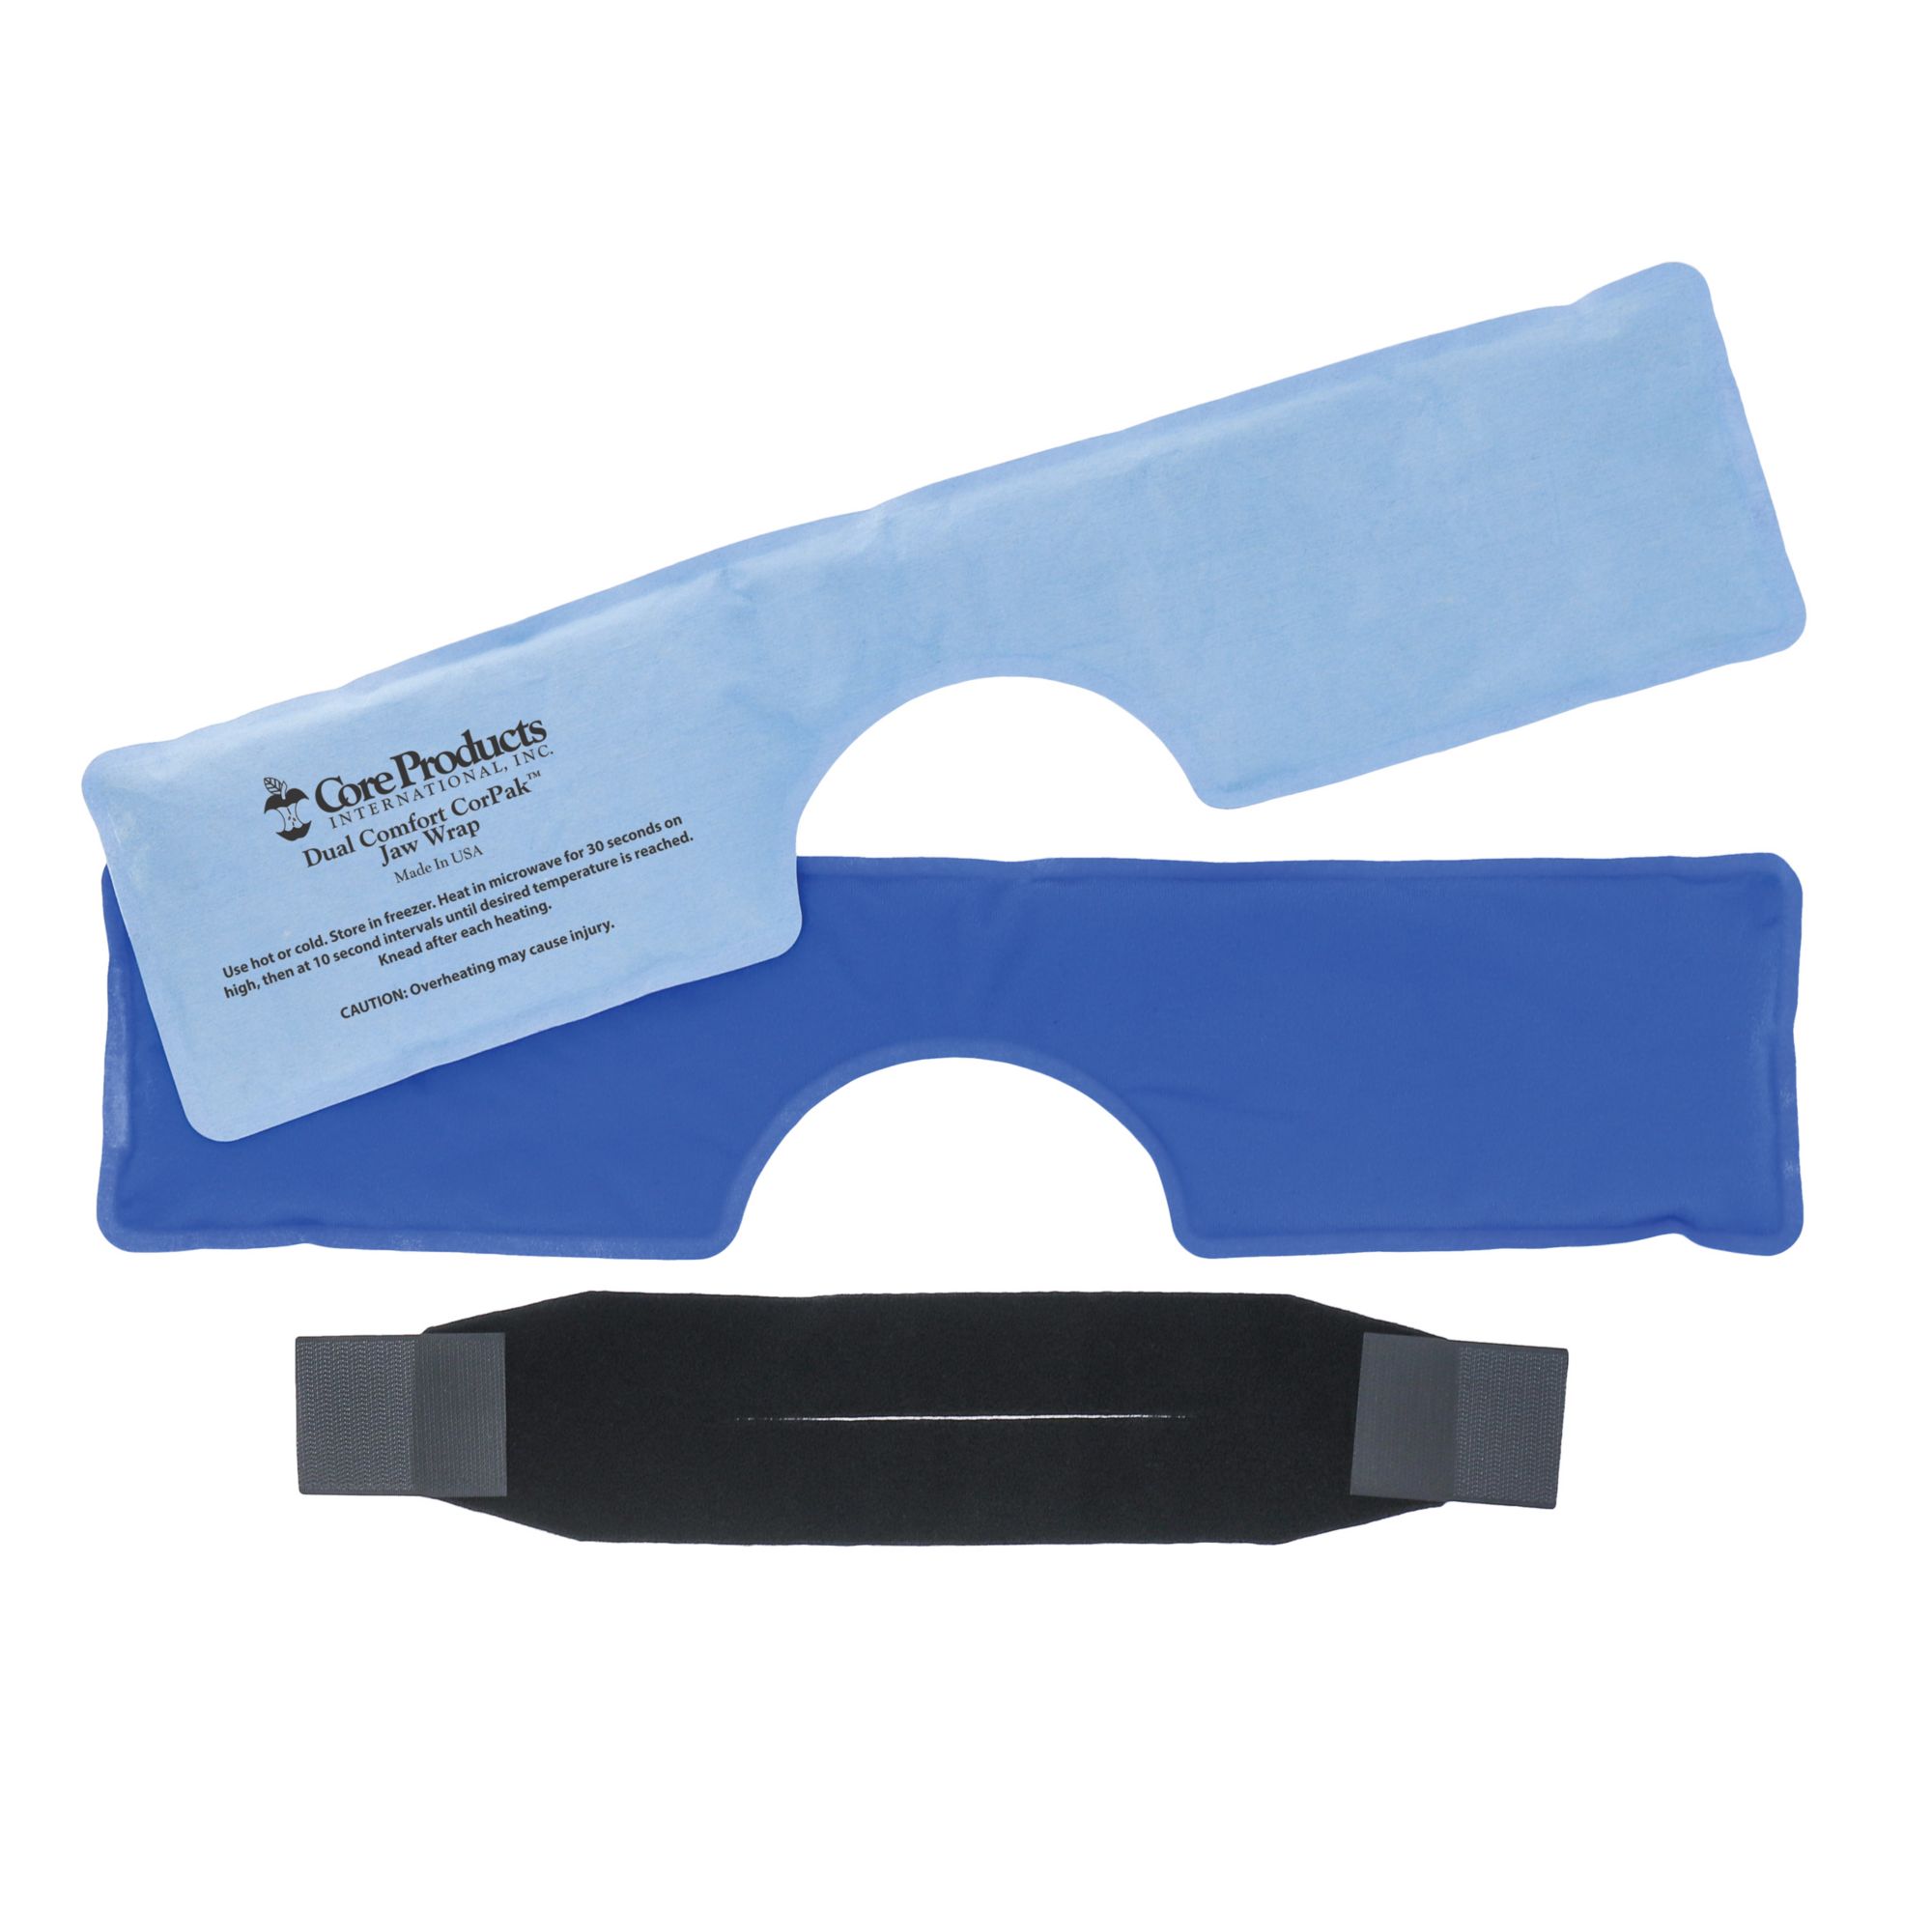 bedbathandbeyond.com | Hot and Cold Therapy - Jaw Wrap